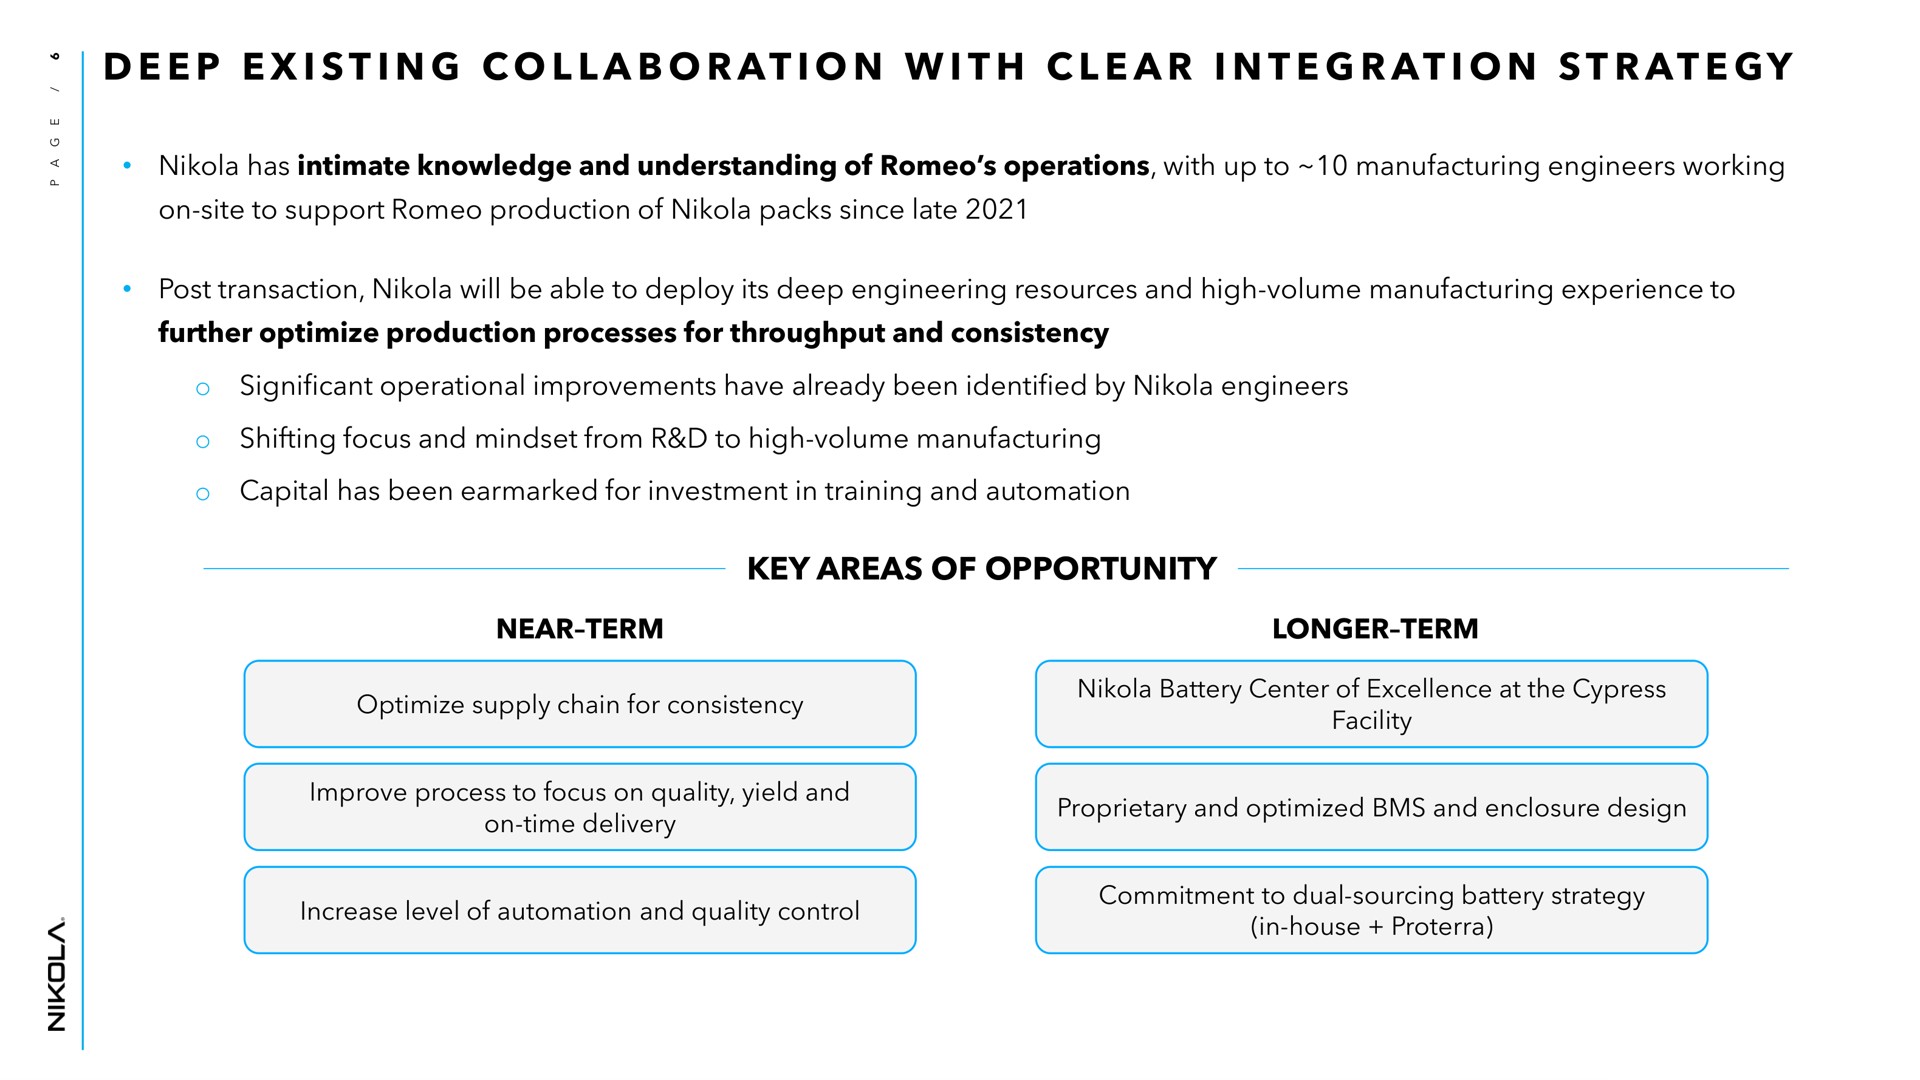 i i a at i i a i at i at key areas of opportunity deep existing collaboration with clear integration strategy | Nikola